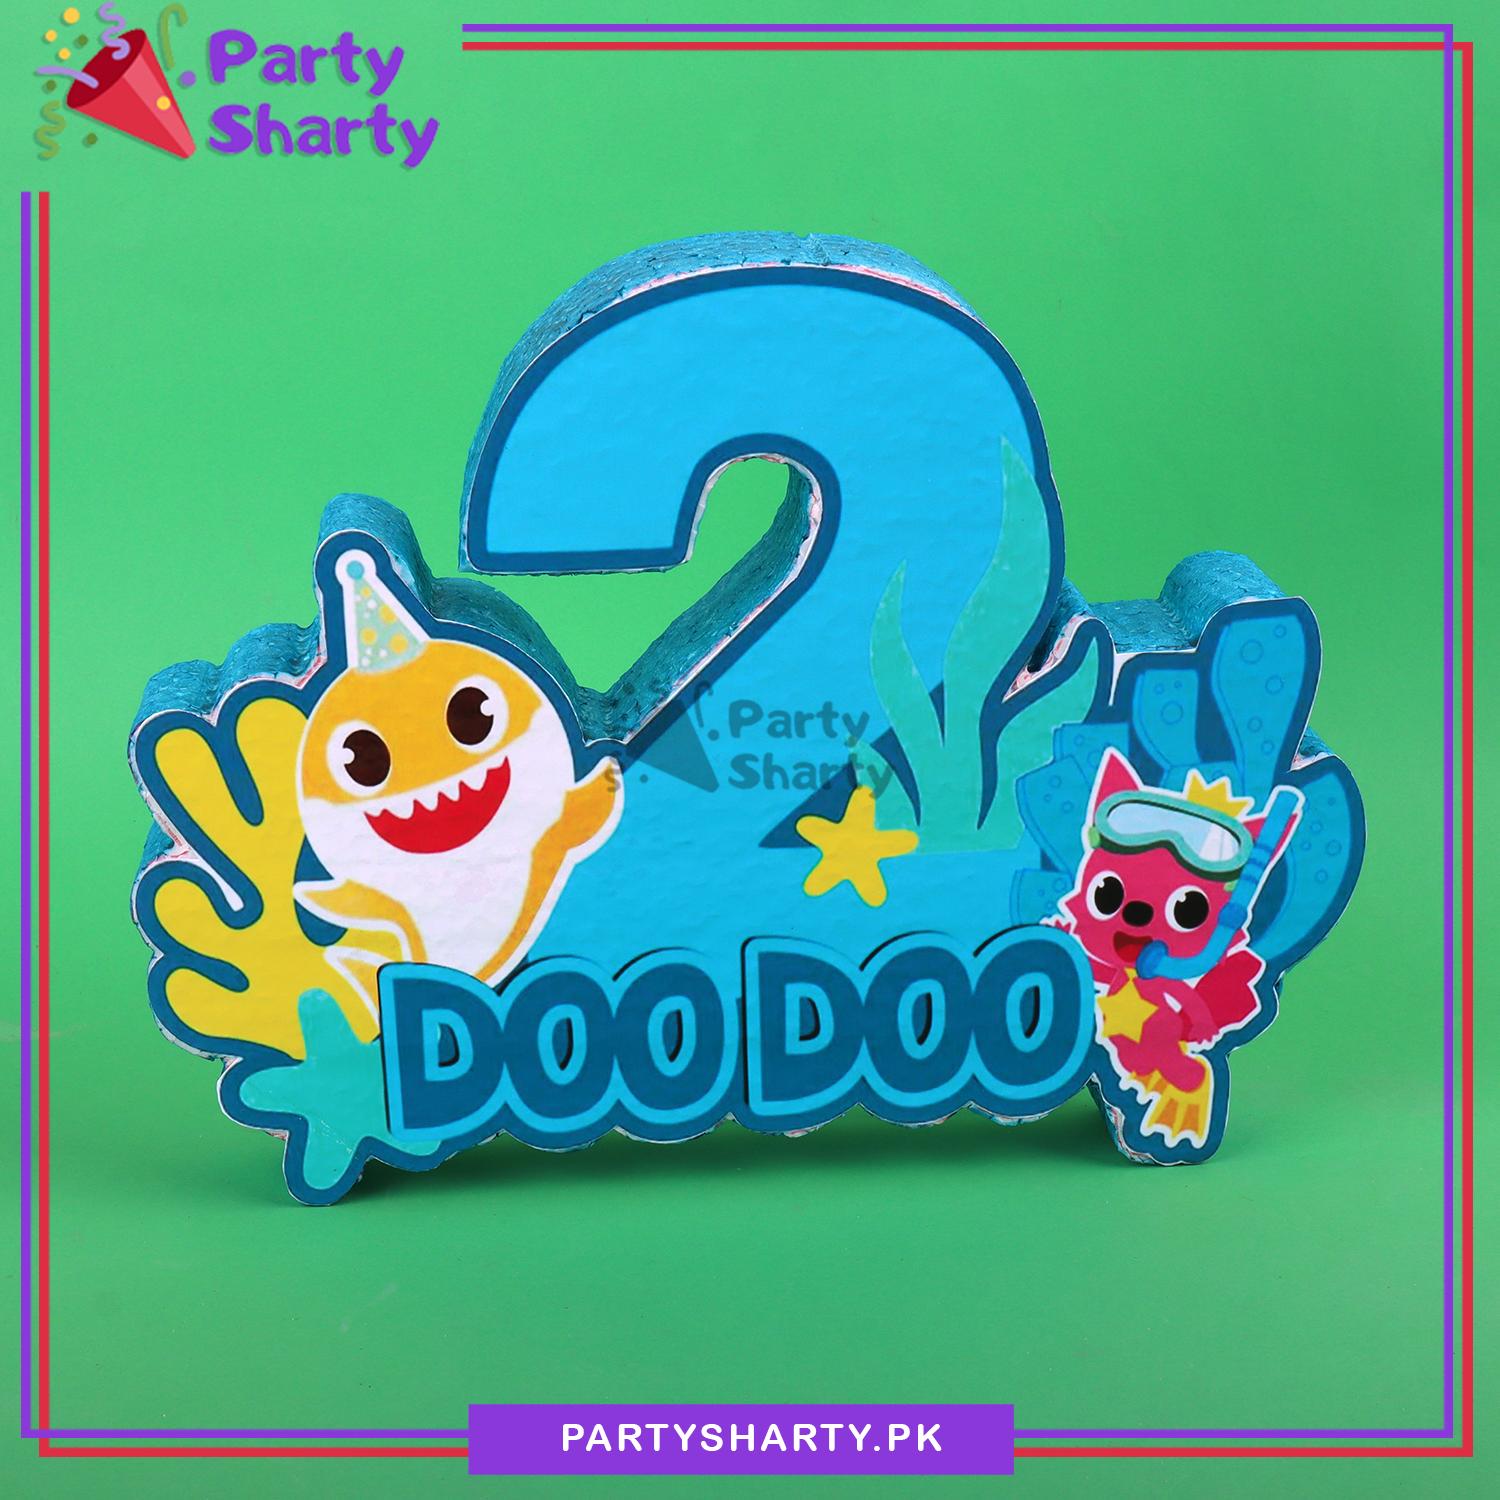 Numeric 2 Thermocol Standee For Baby Shark Theme Based Second Birthday Celebration and Party Decoration